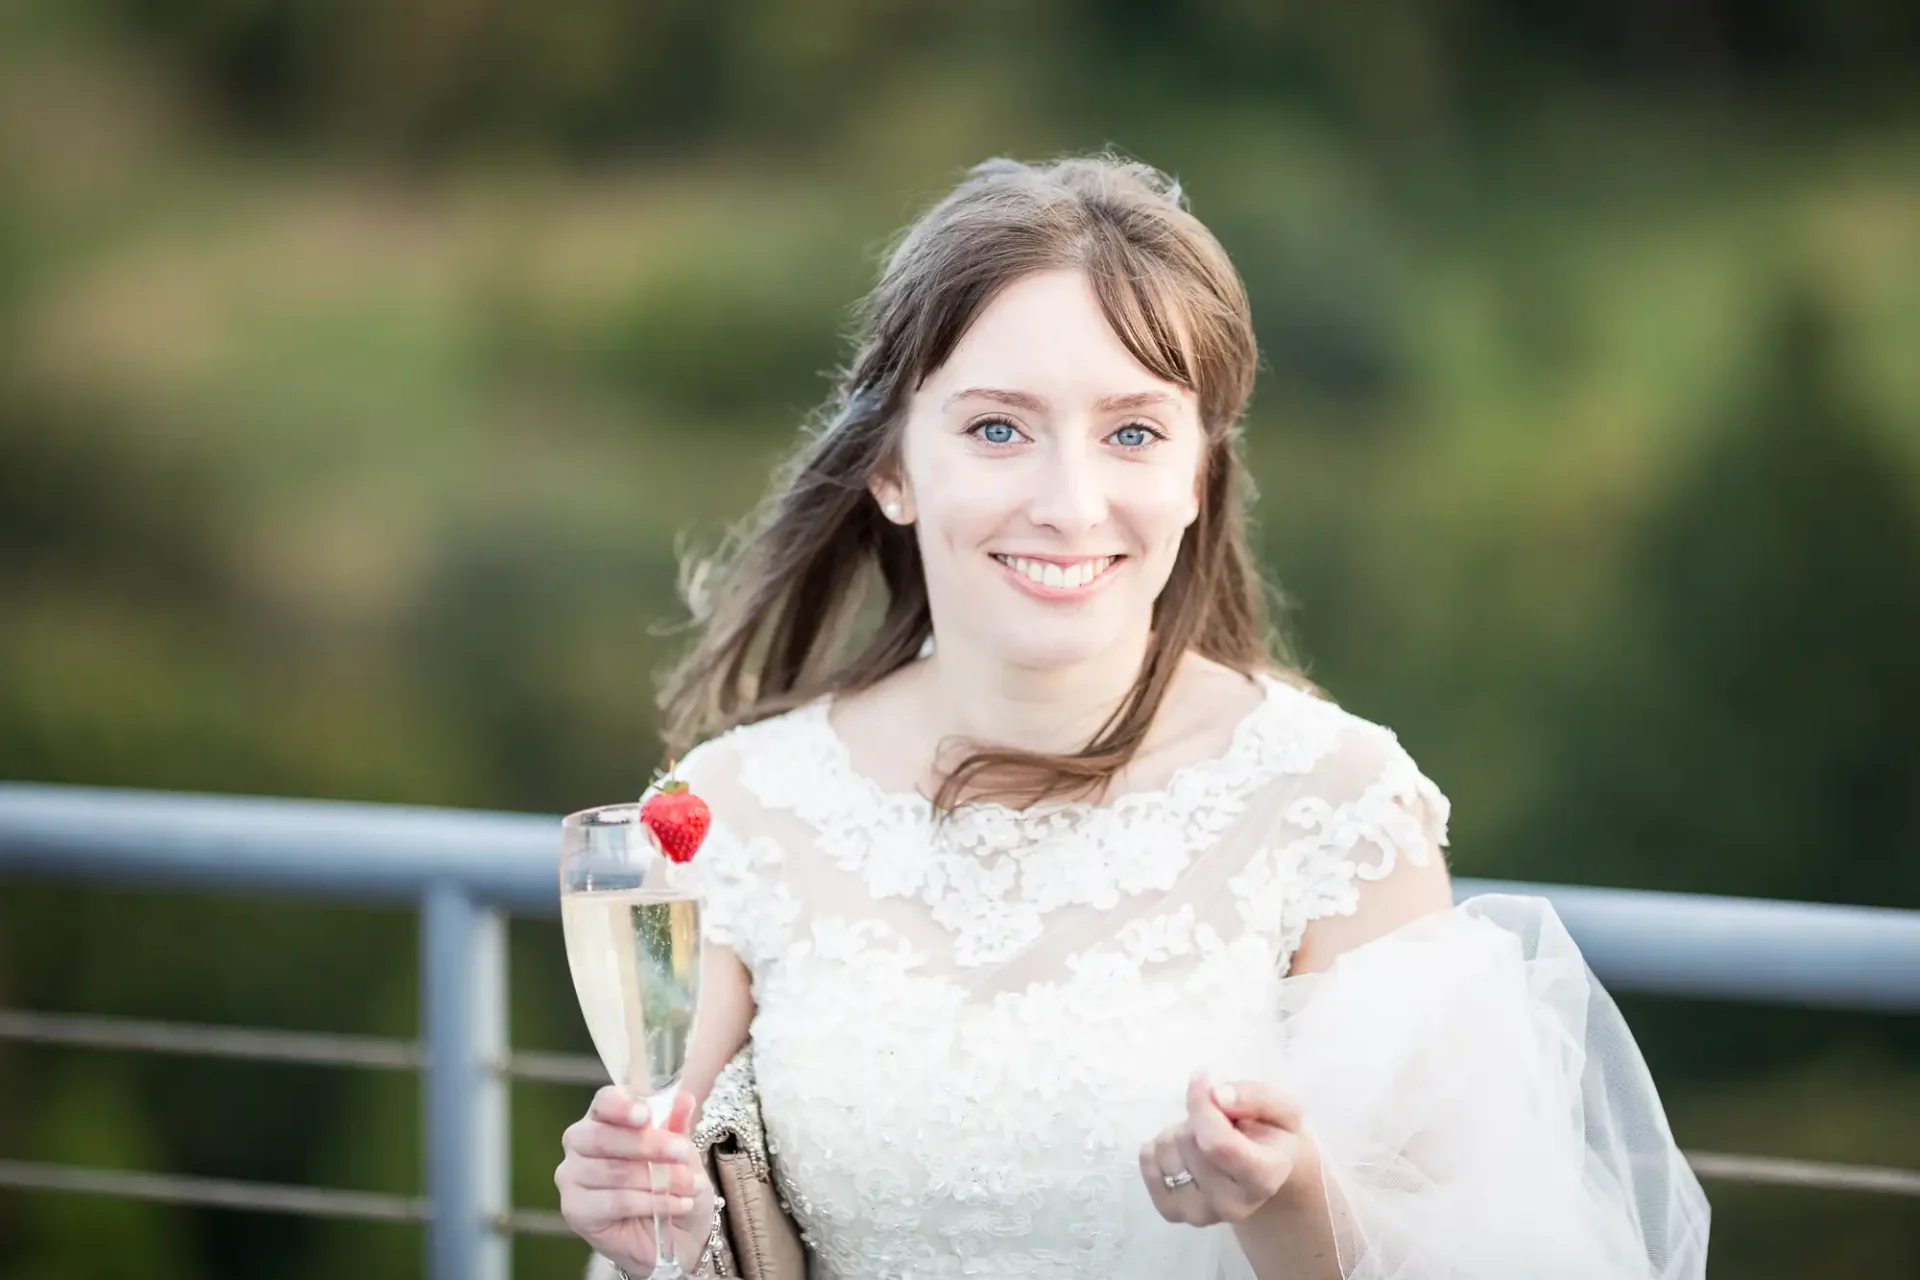 A smiling bride in a lace dress holding a champagne glass with a strawberry, standing outdoors with a blurred green background.